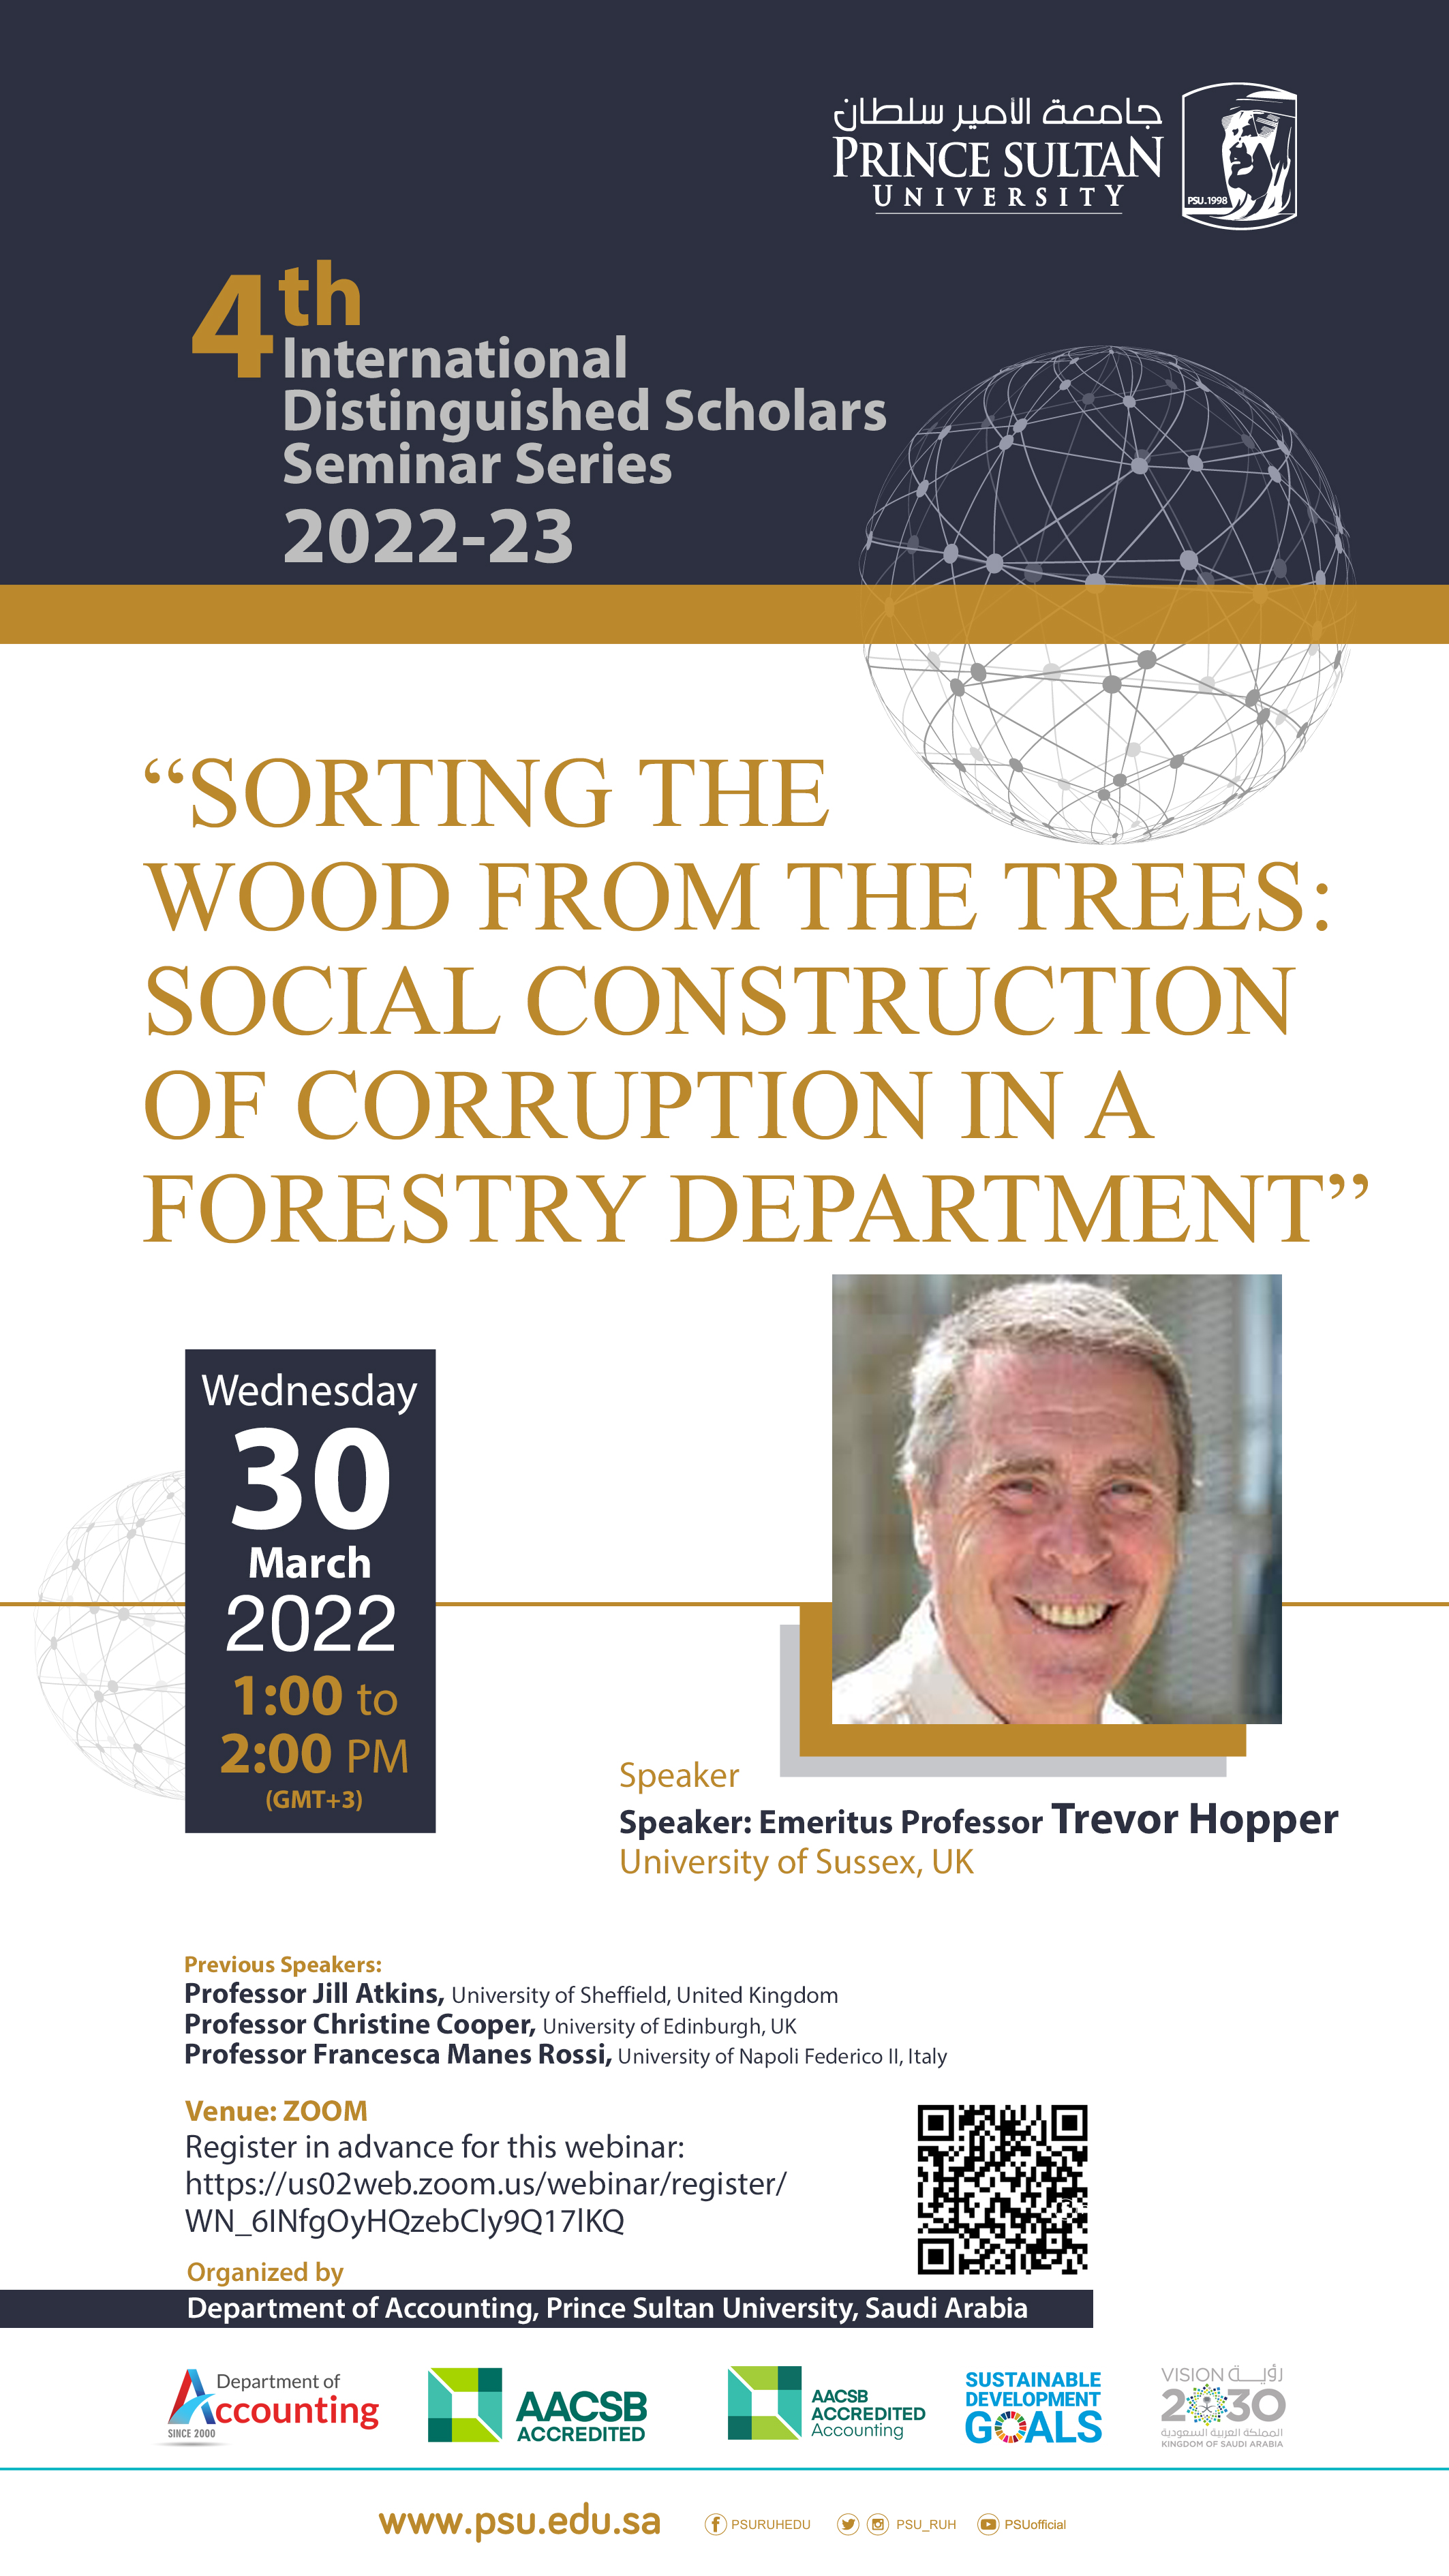 Sorting The Wood from the Trees: Social Construction of Corruption in a Forestry Department